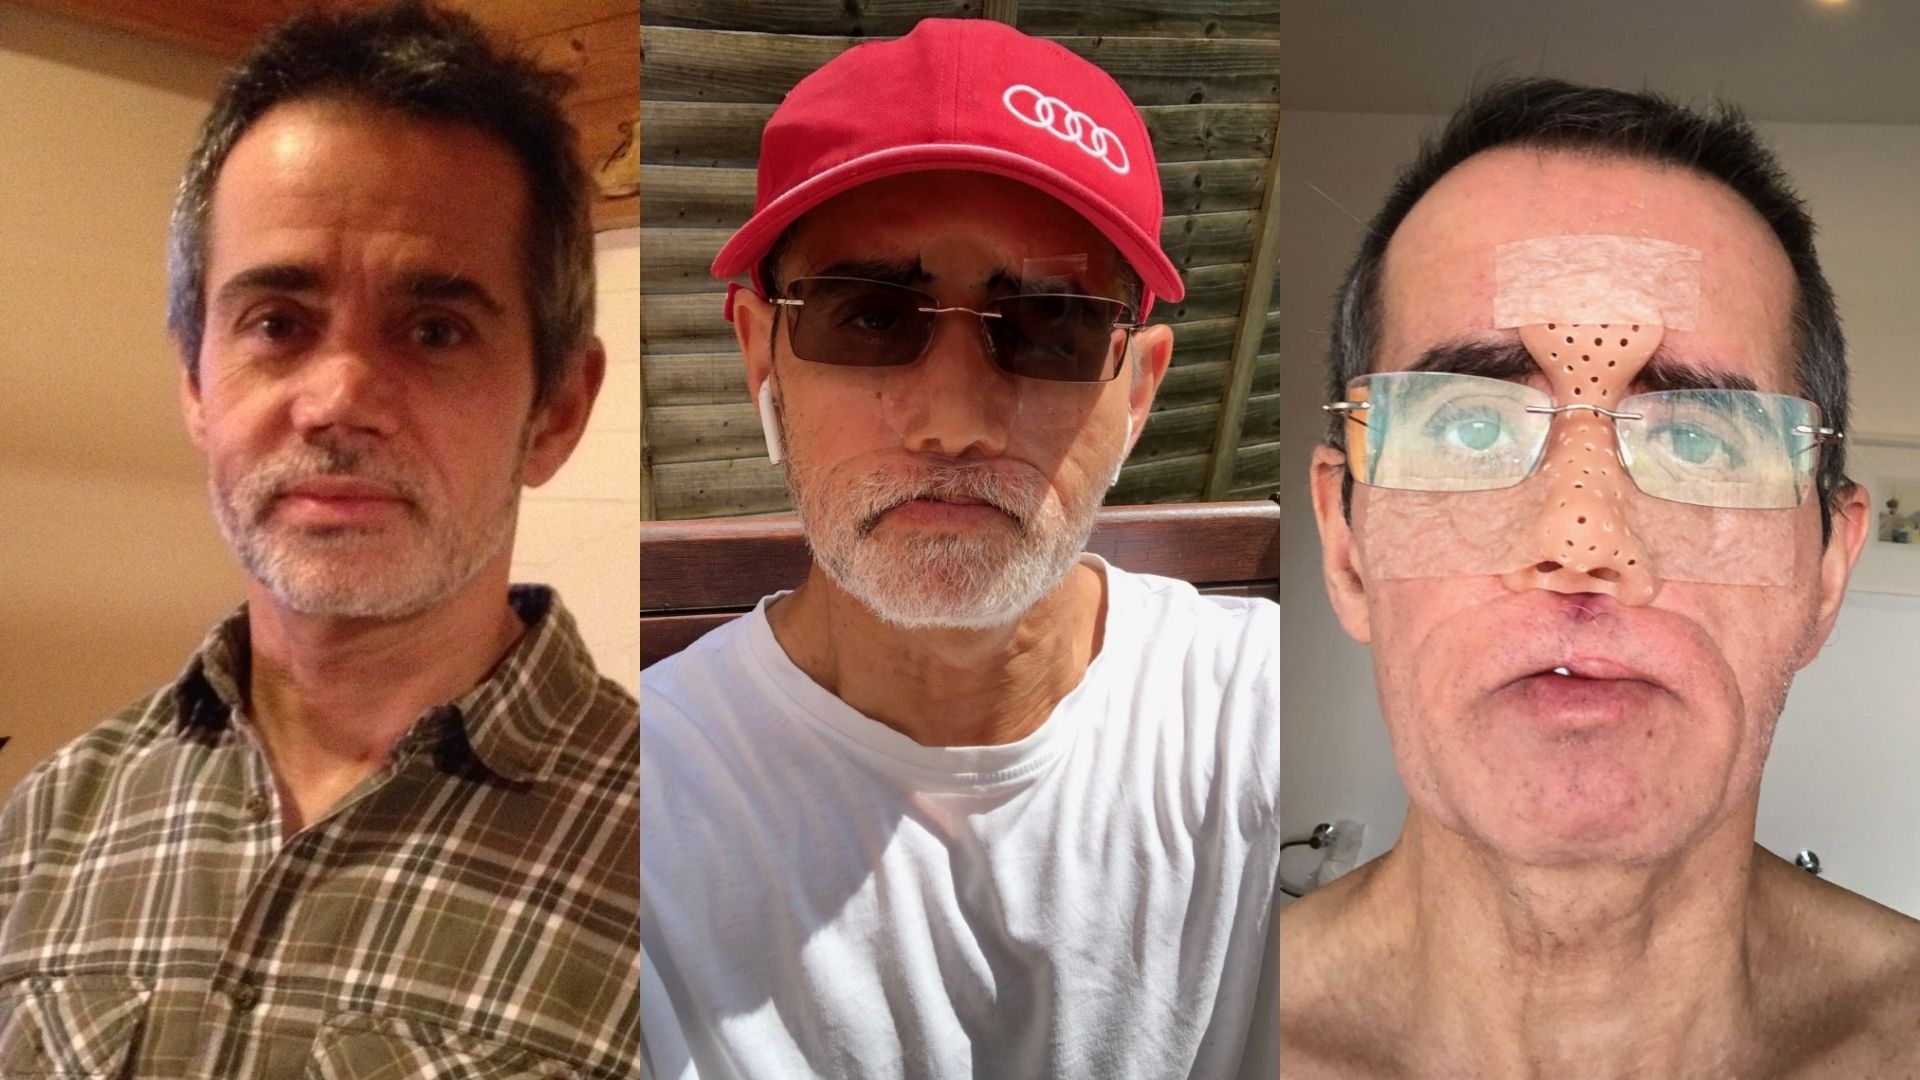 Three images of Mark. Left: Mark, a man is his early/mid 50s, with short dark brown hair and a greying beard. He's wearing a check shirt. Centre: Mark in his late 50s. He's wearing a red cap, sunglasses and has a prosthetic nose. He's wearing a white t-shirt. Right: Mark, late 50s, he has short dark/greying hair and is wearing glasses and has a prosthetic nose.